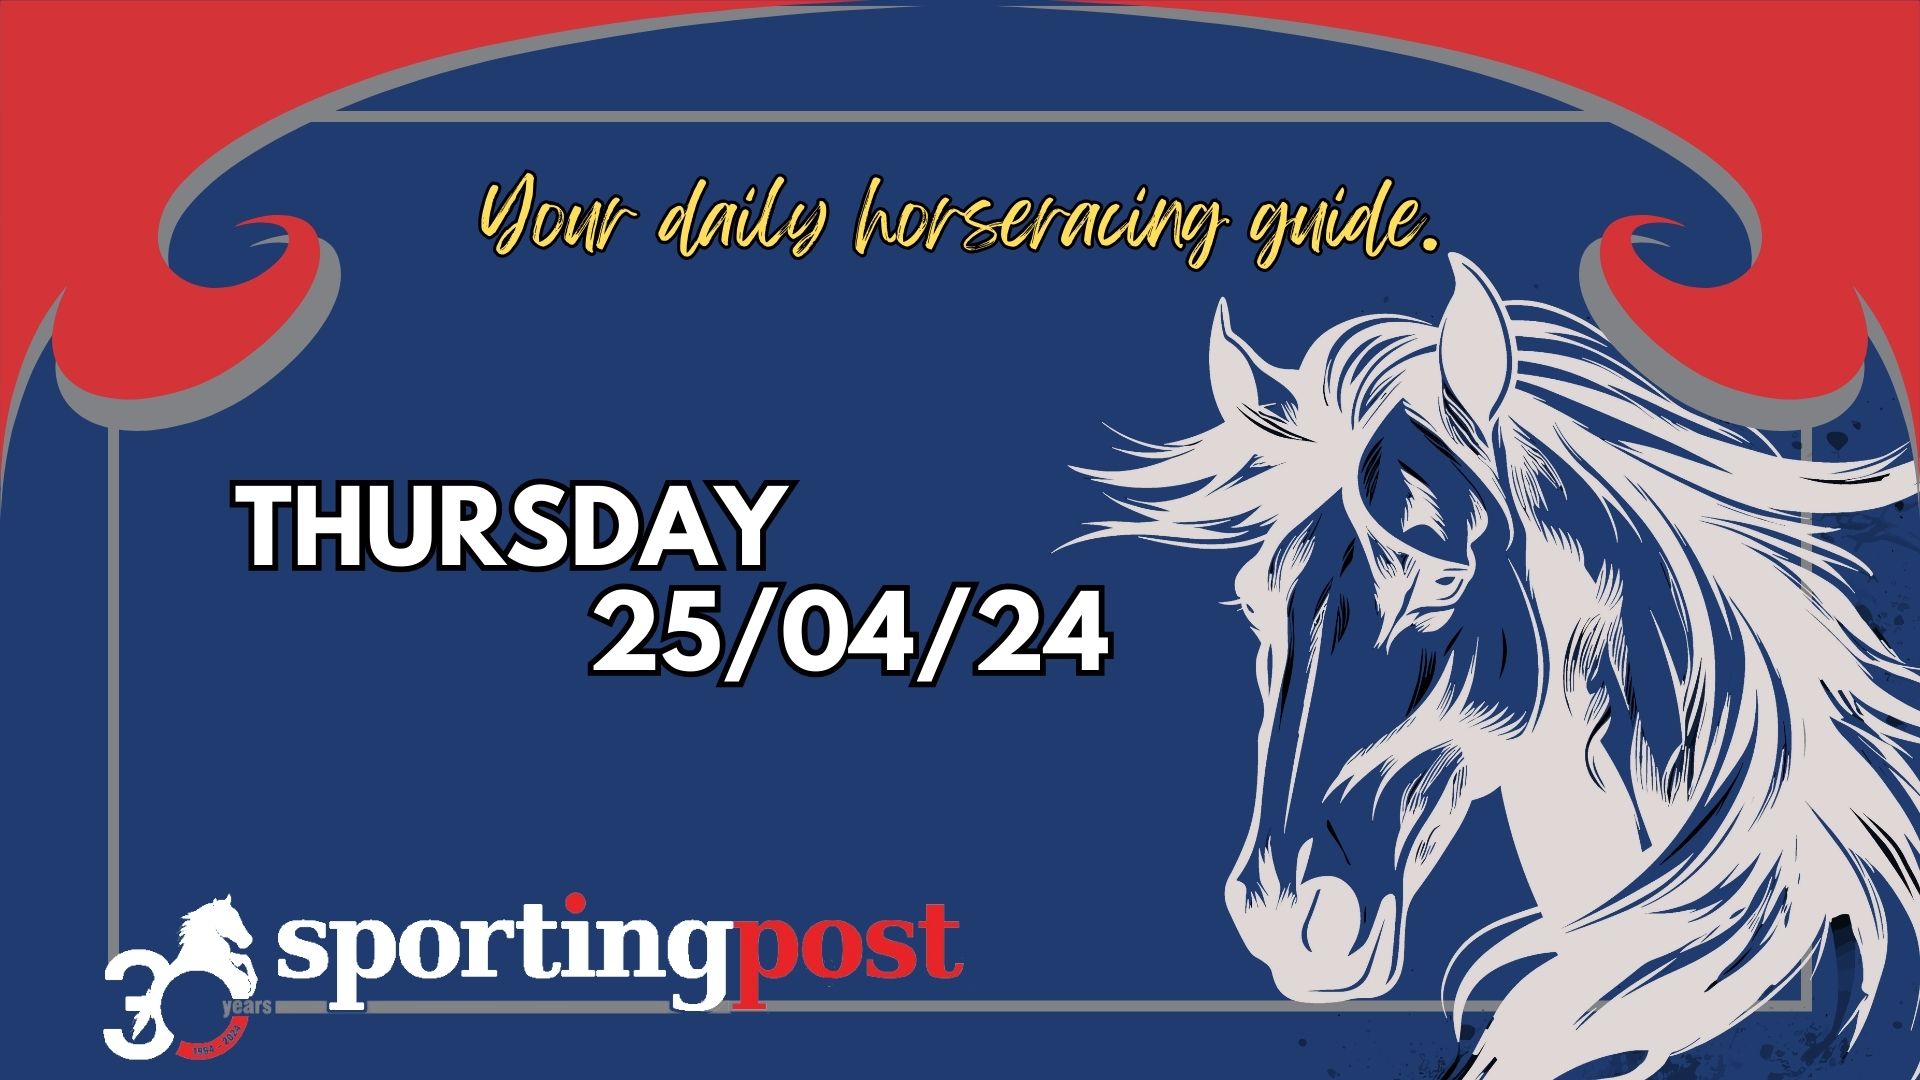 The Global Horseracing Guide: Thursday